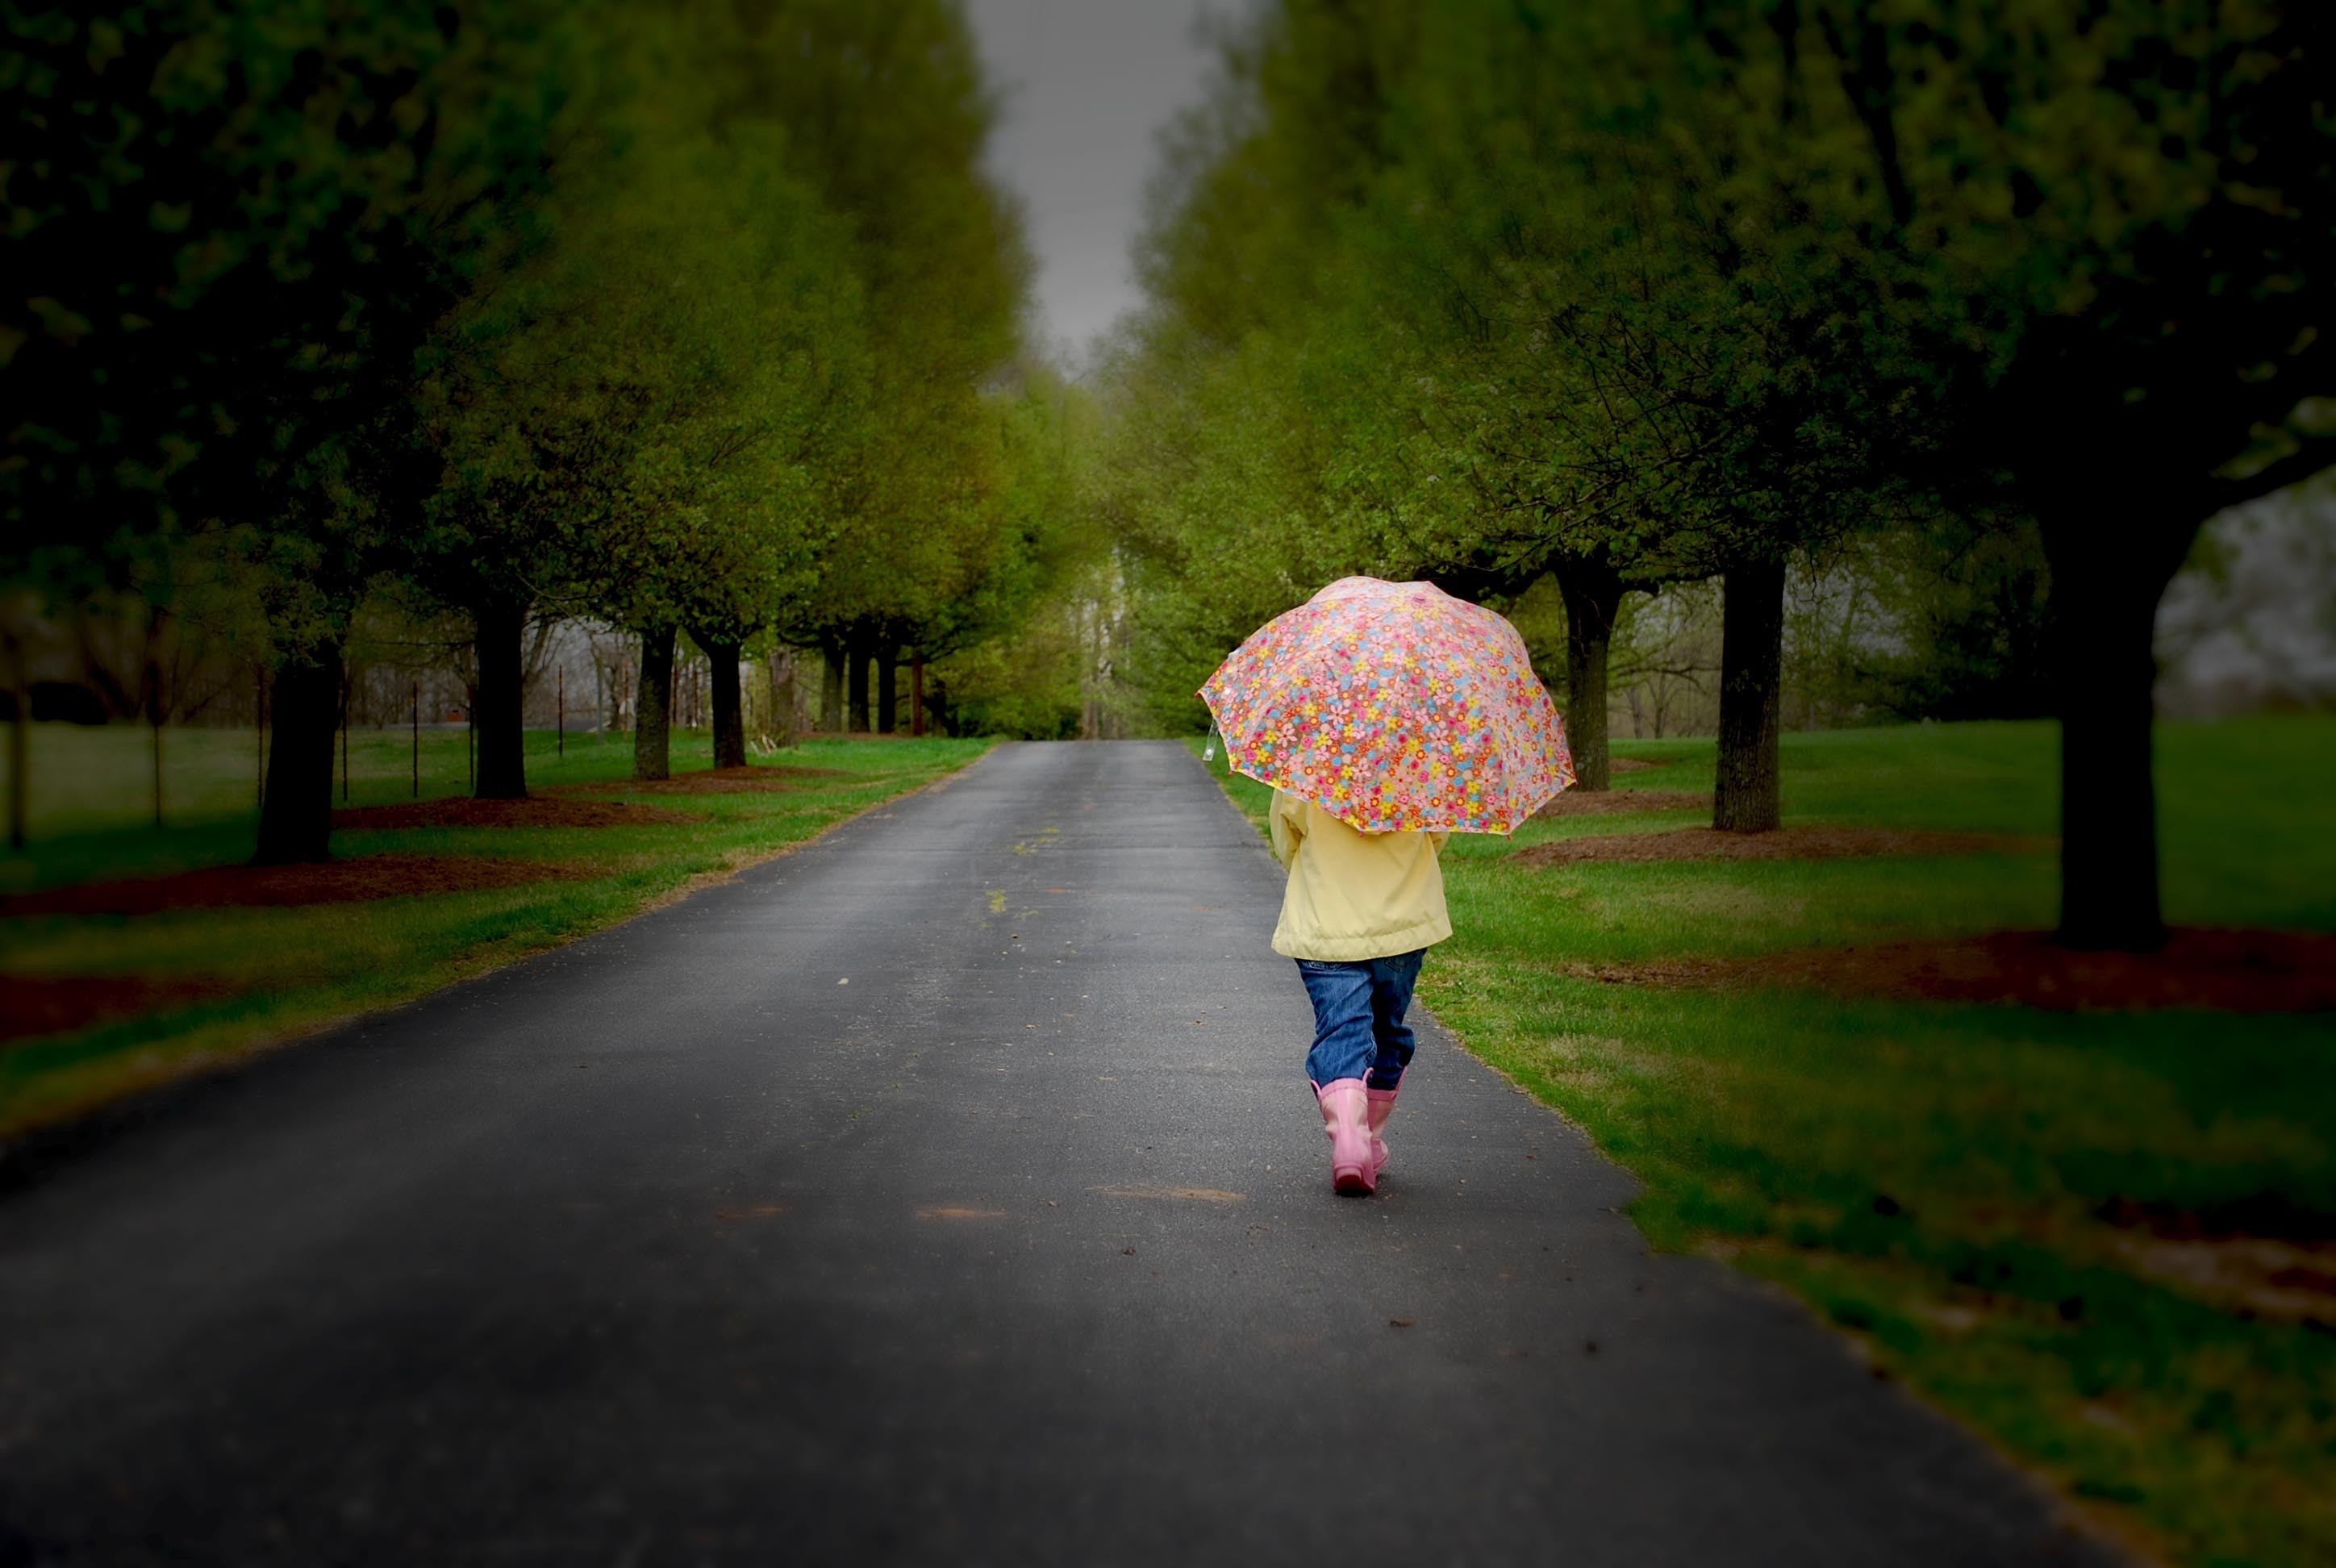 park, wood, miscellanea, miscellaneous, road, tree, stroll, overcast, mainly cloudy, umbrella 32K